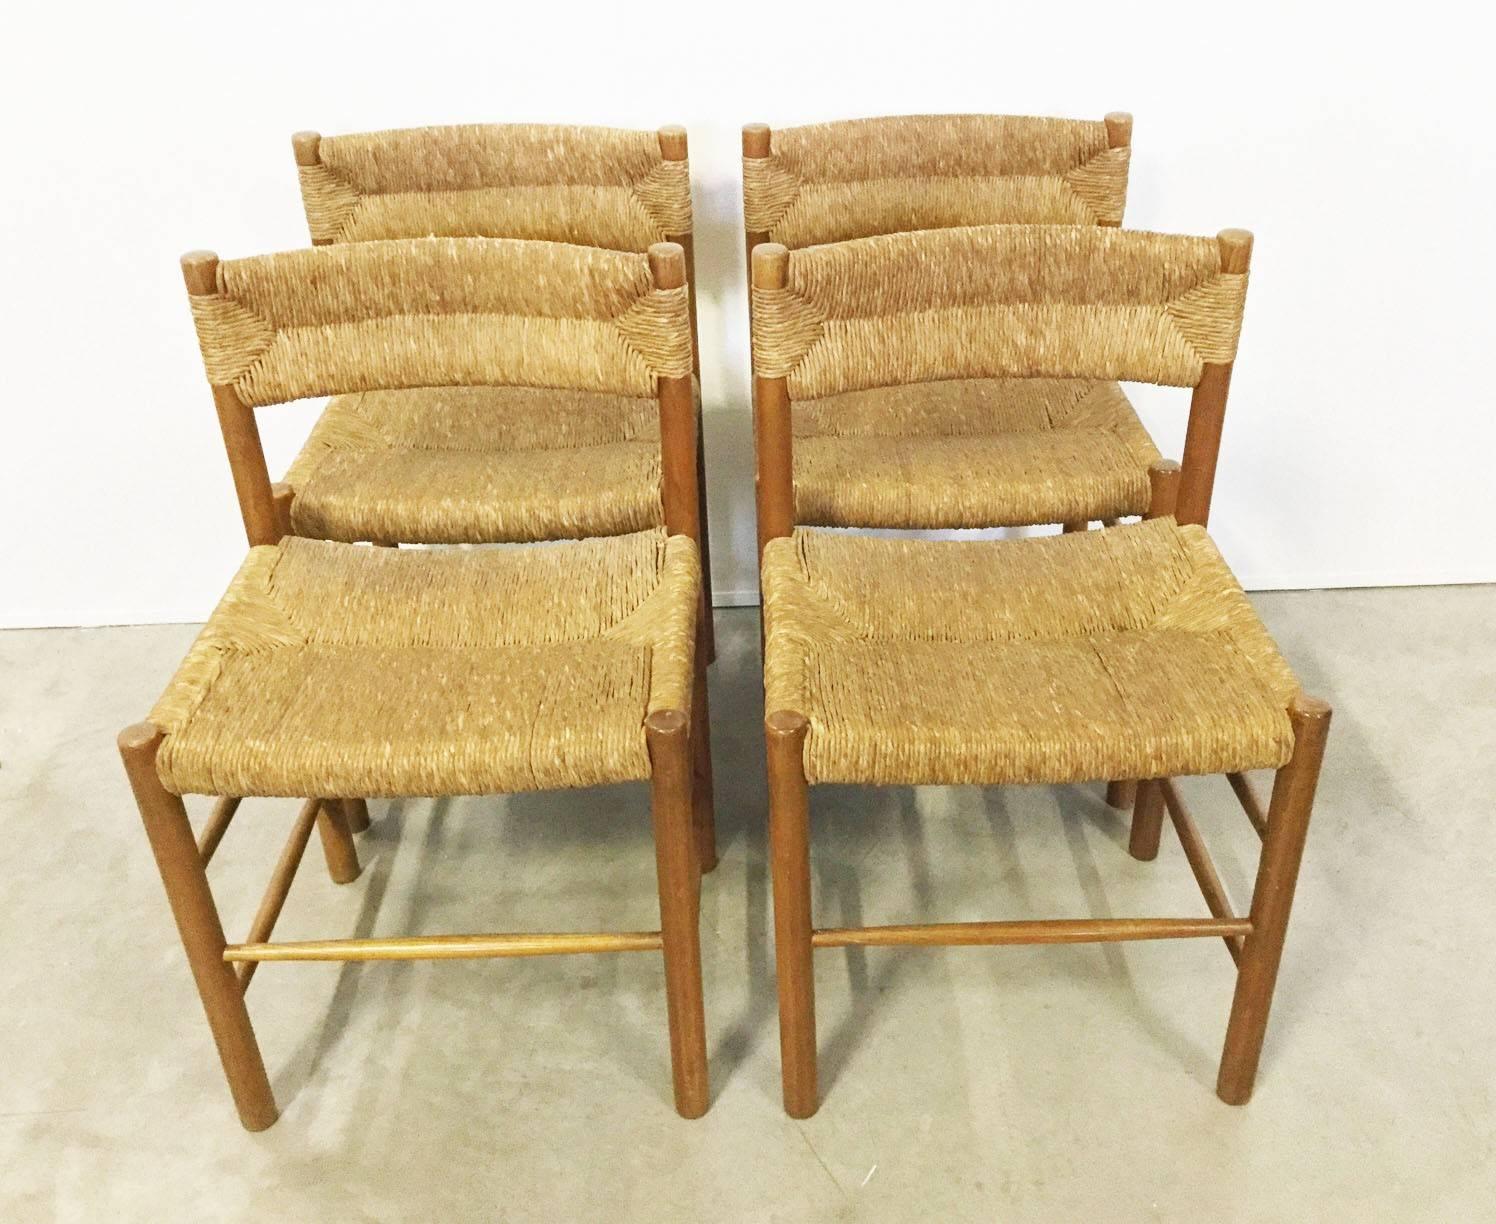 Four chairs with straw seat and back, legs in thick pinewood.
Designed by Robert Sentou